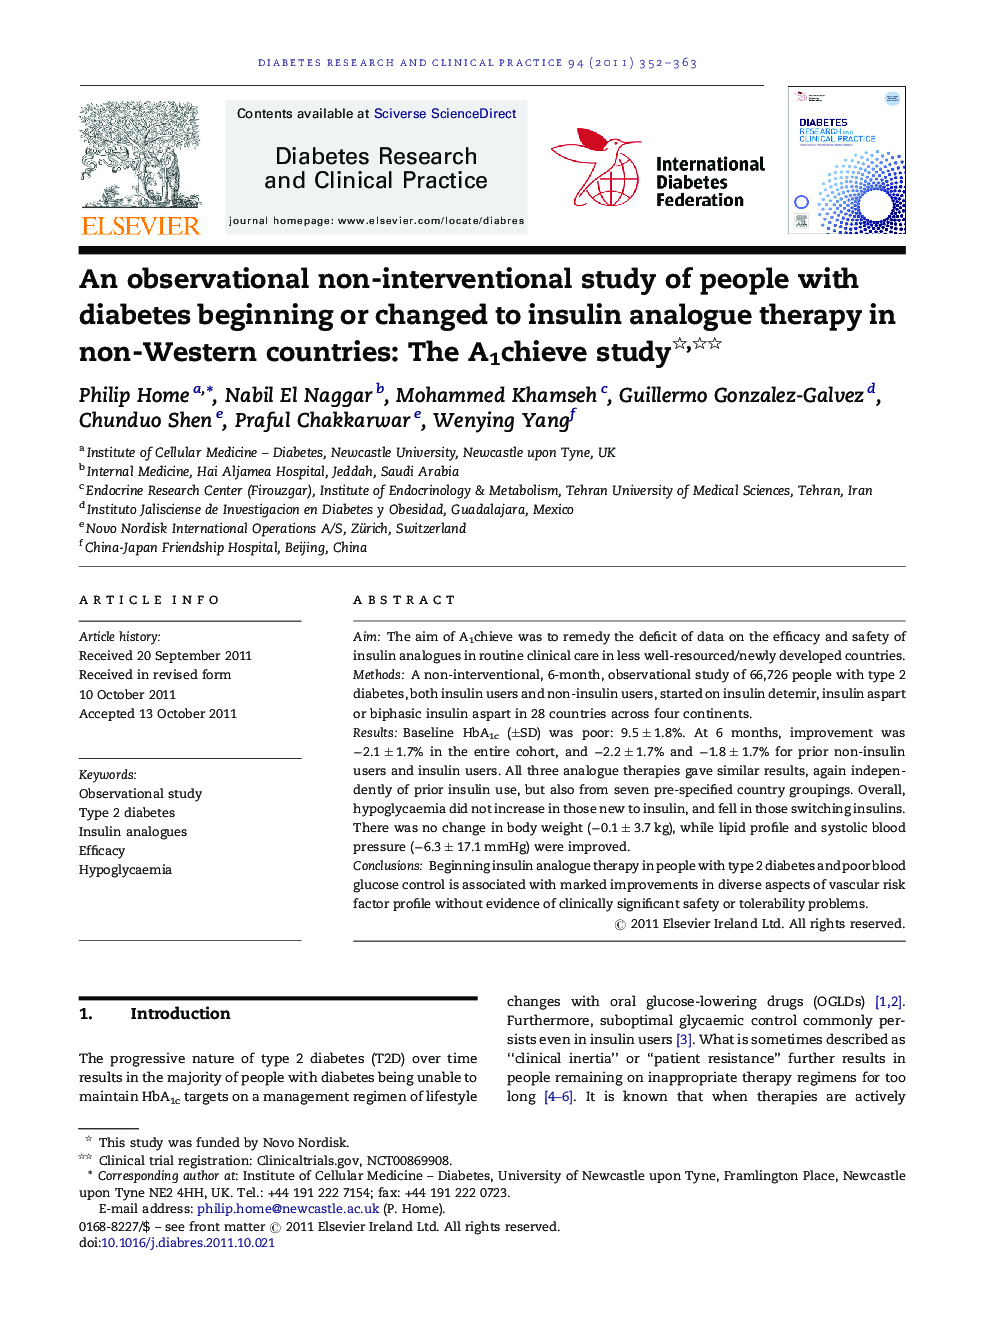 An observational non-interventional study of people with diabetes beginning or changed to insulin analogue therapy in non-Western countries: The A1chieve study